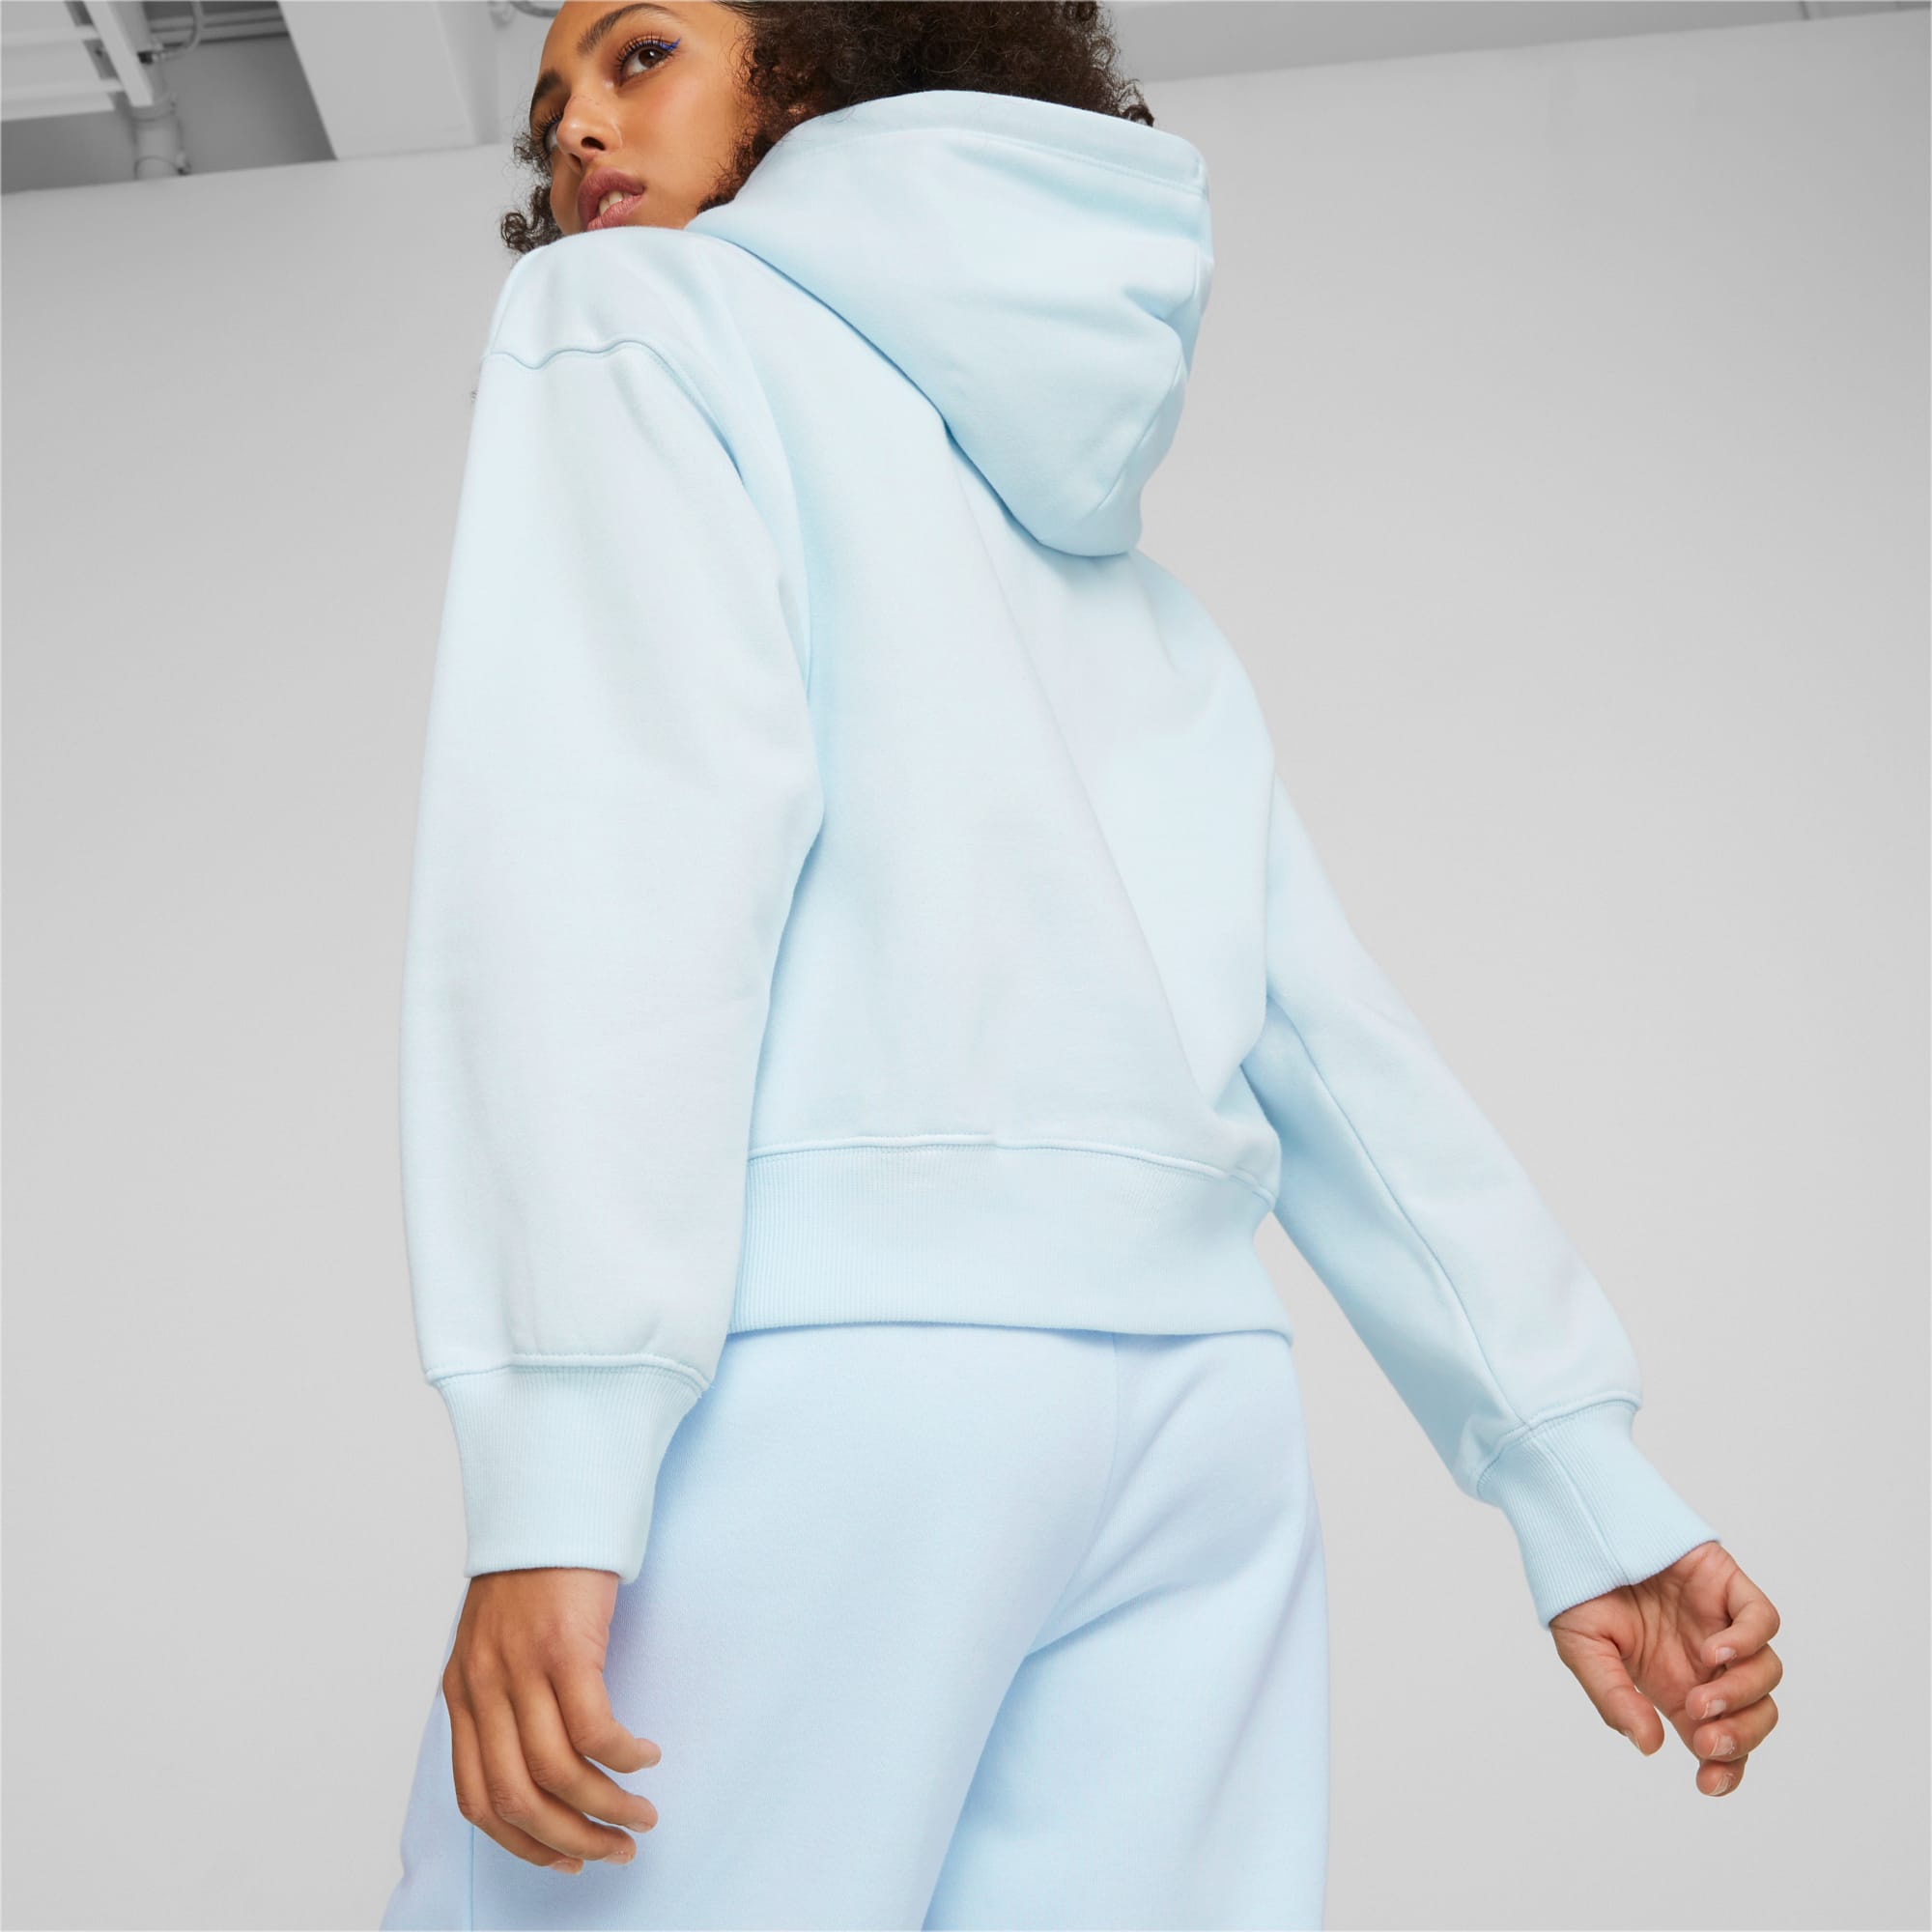 PUMA Classics Women's Oversized Hoodie, Icy Blue, Size L, Clothing